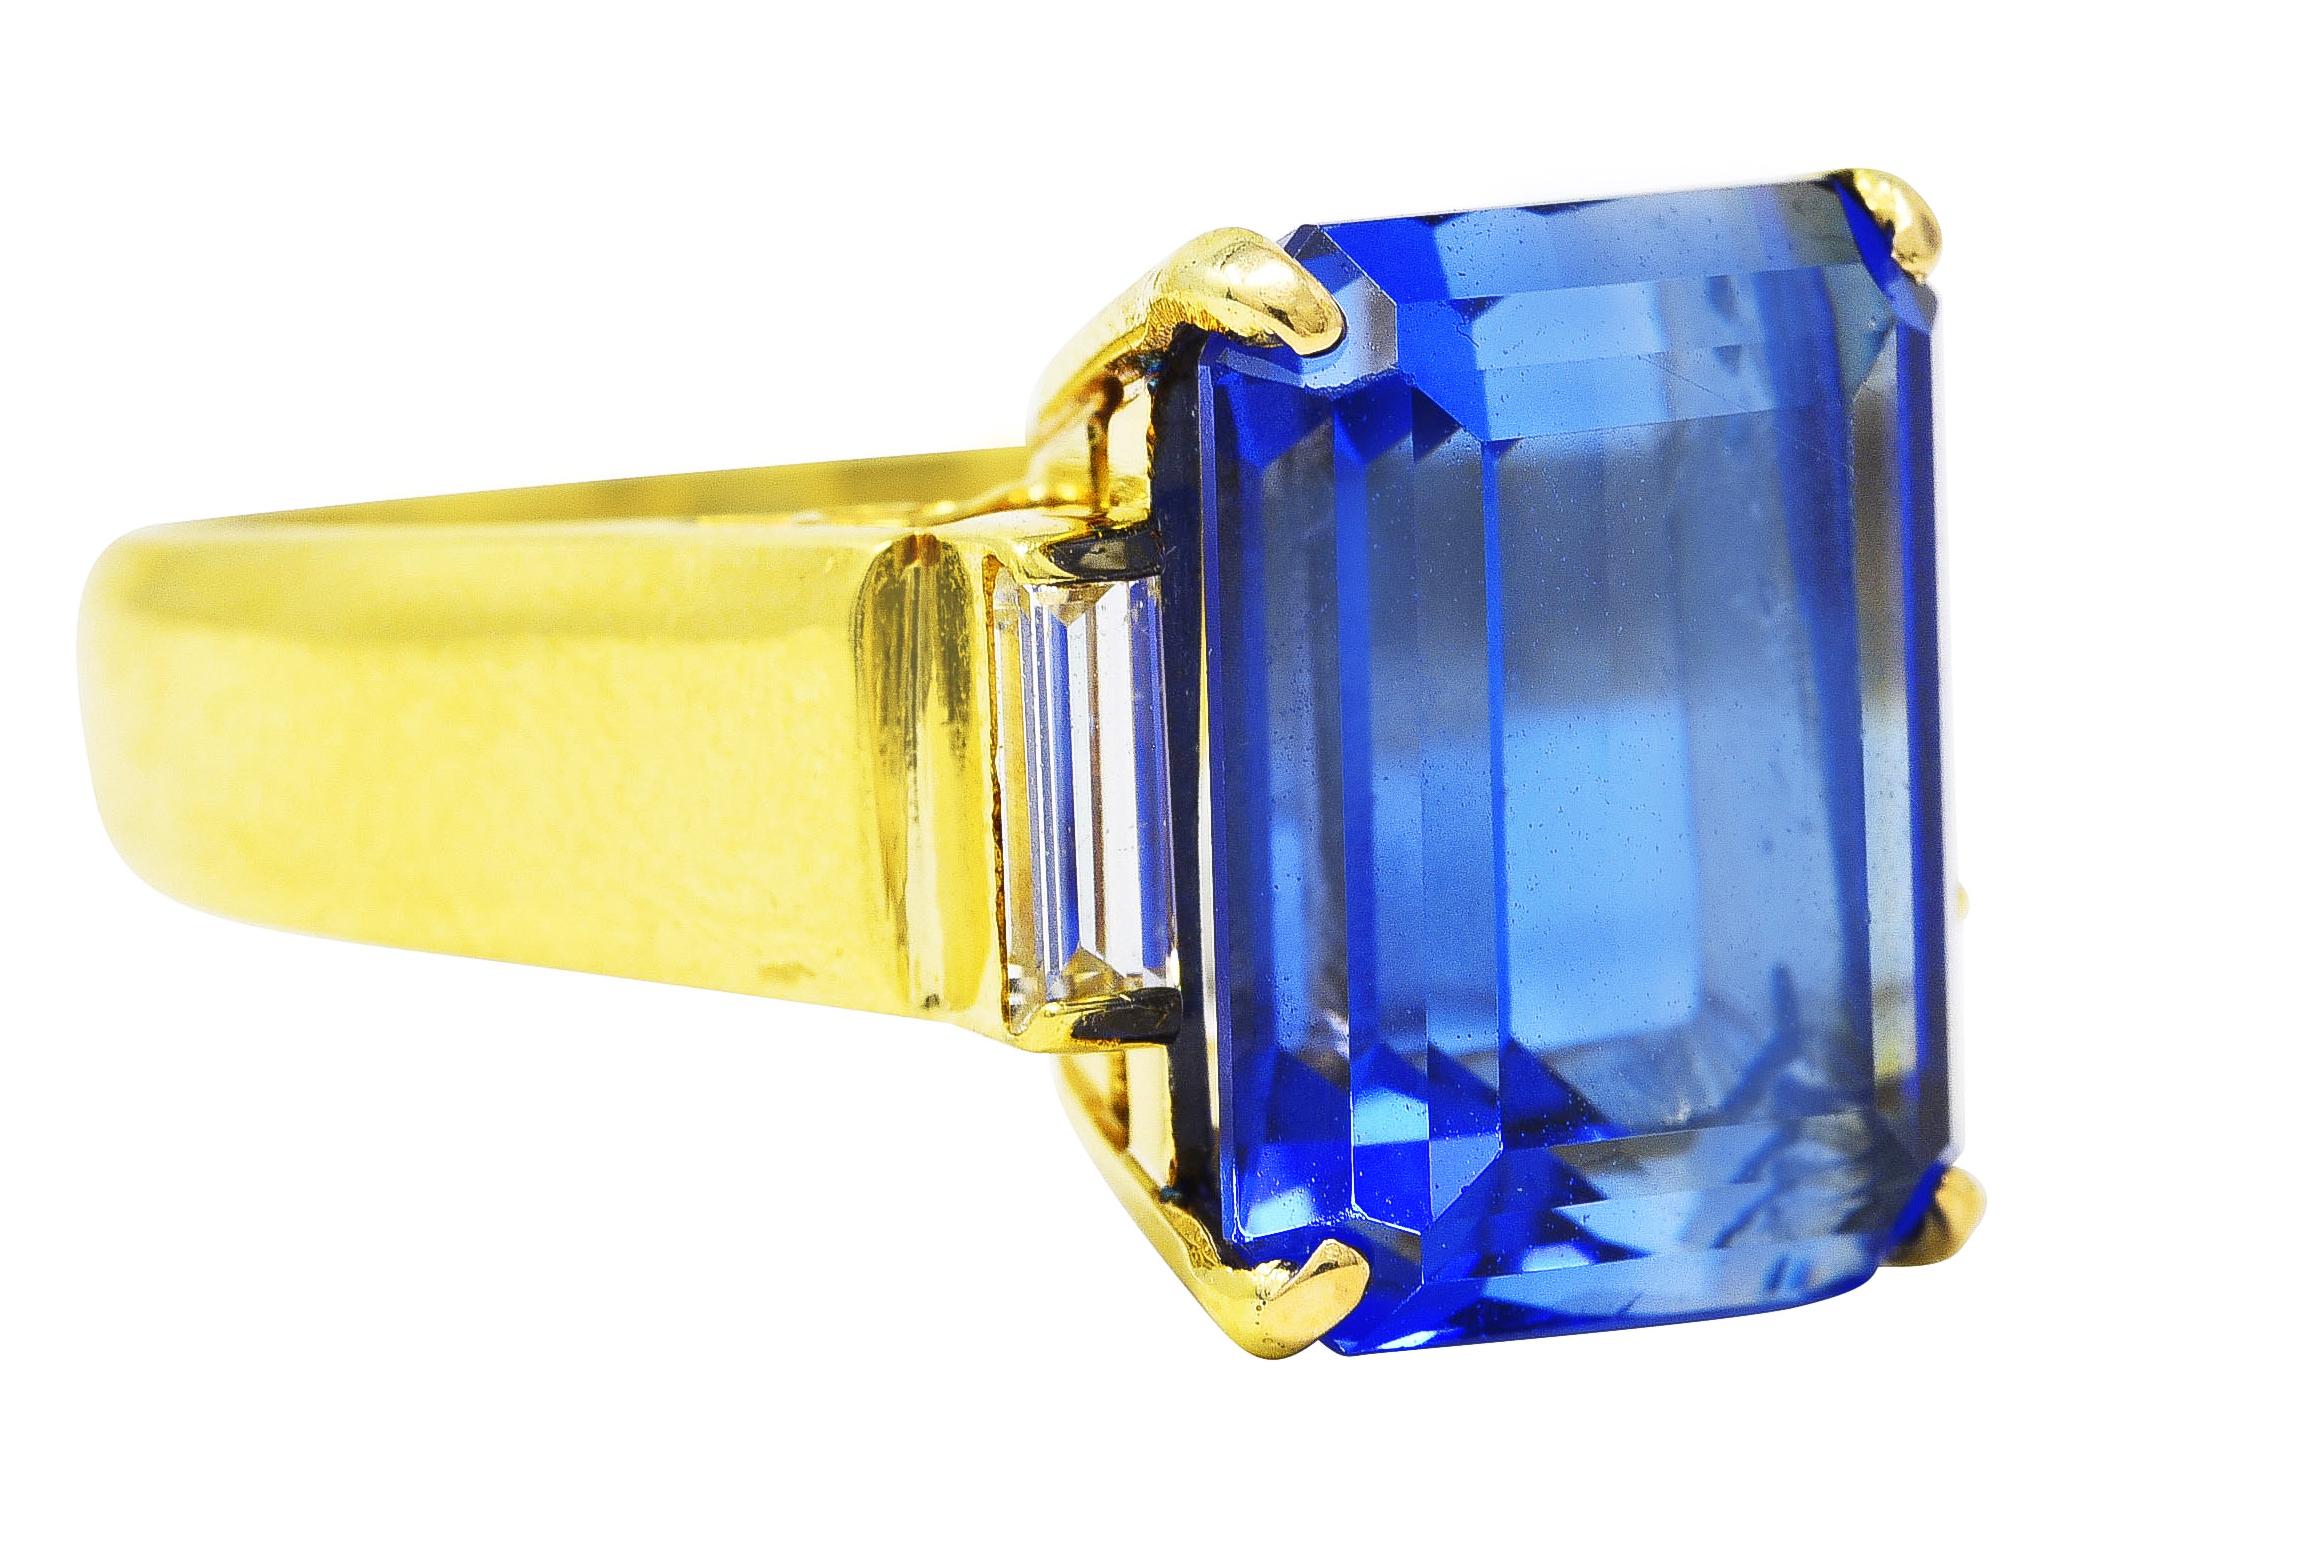 Substantial gemstone ring features an emerald cut tanzanite weighing approximately 8.85 carats. Basket set with eye clean violetish blue color - medium saturation. Flanked by cathedral shoulders accented by bar set baguette cut diamonds. Weighing in